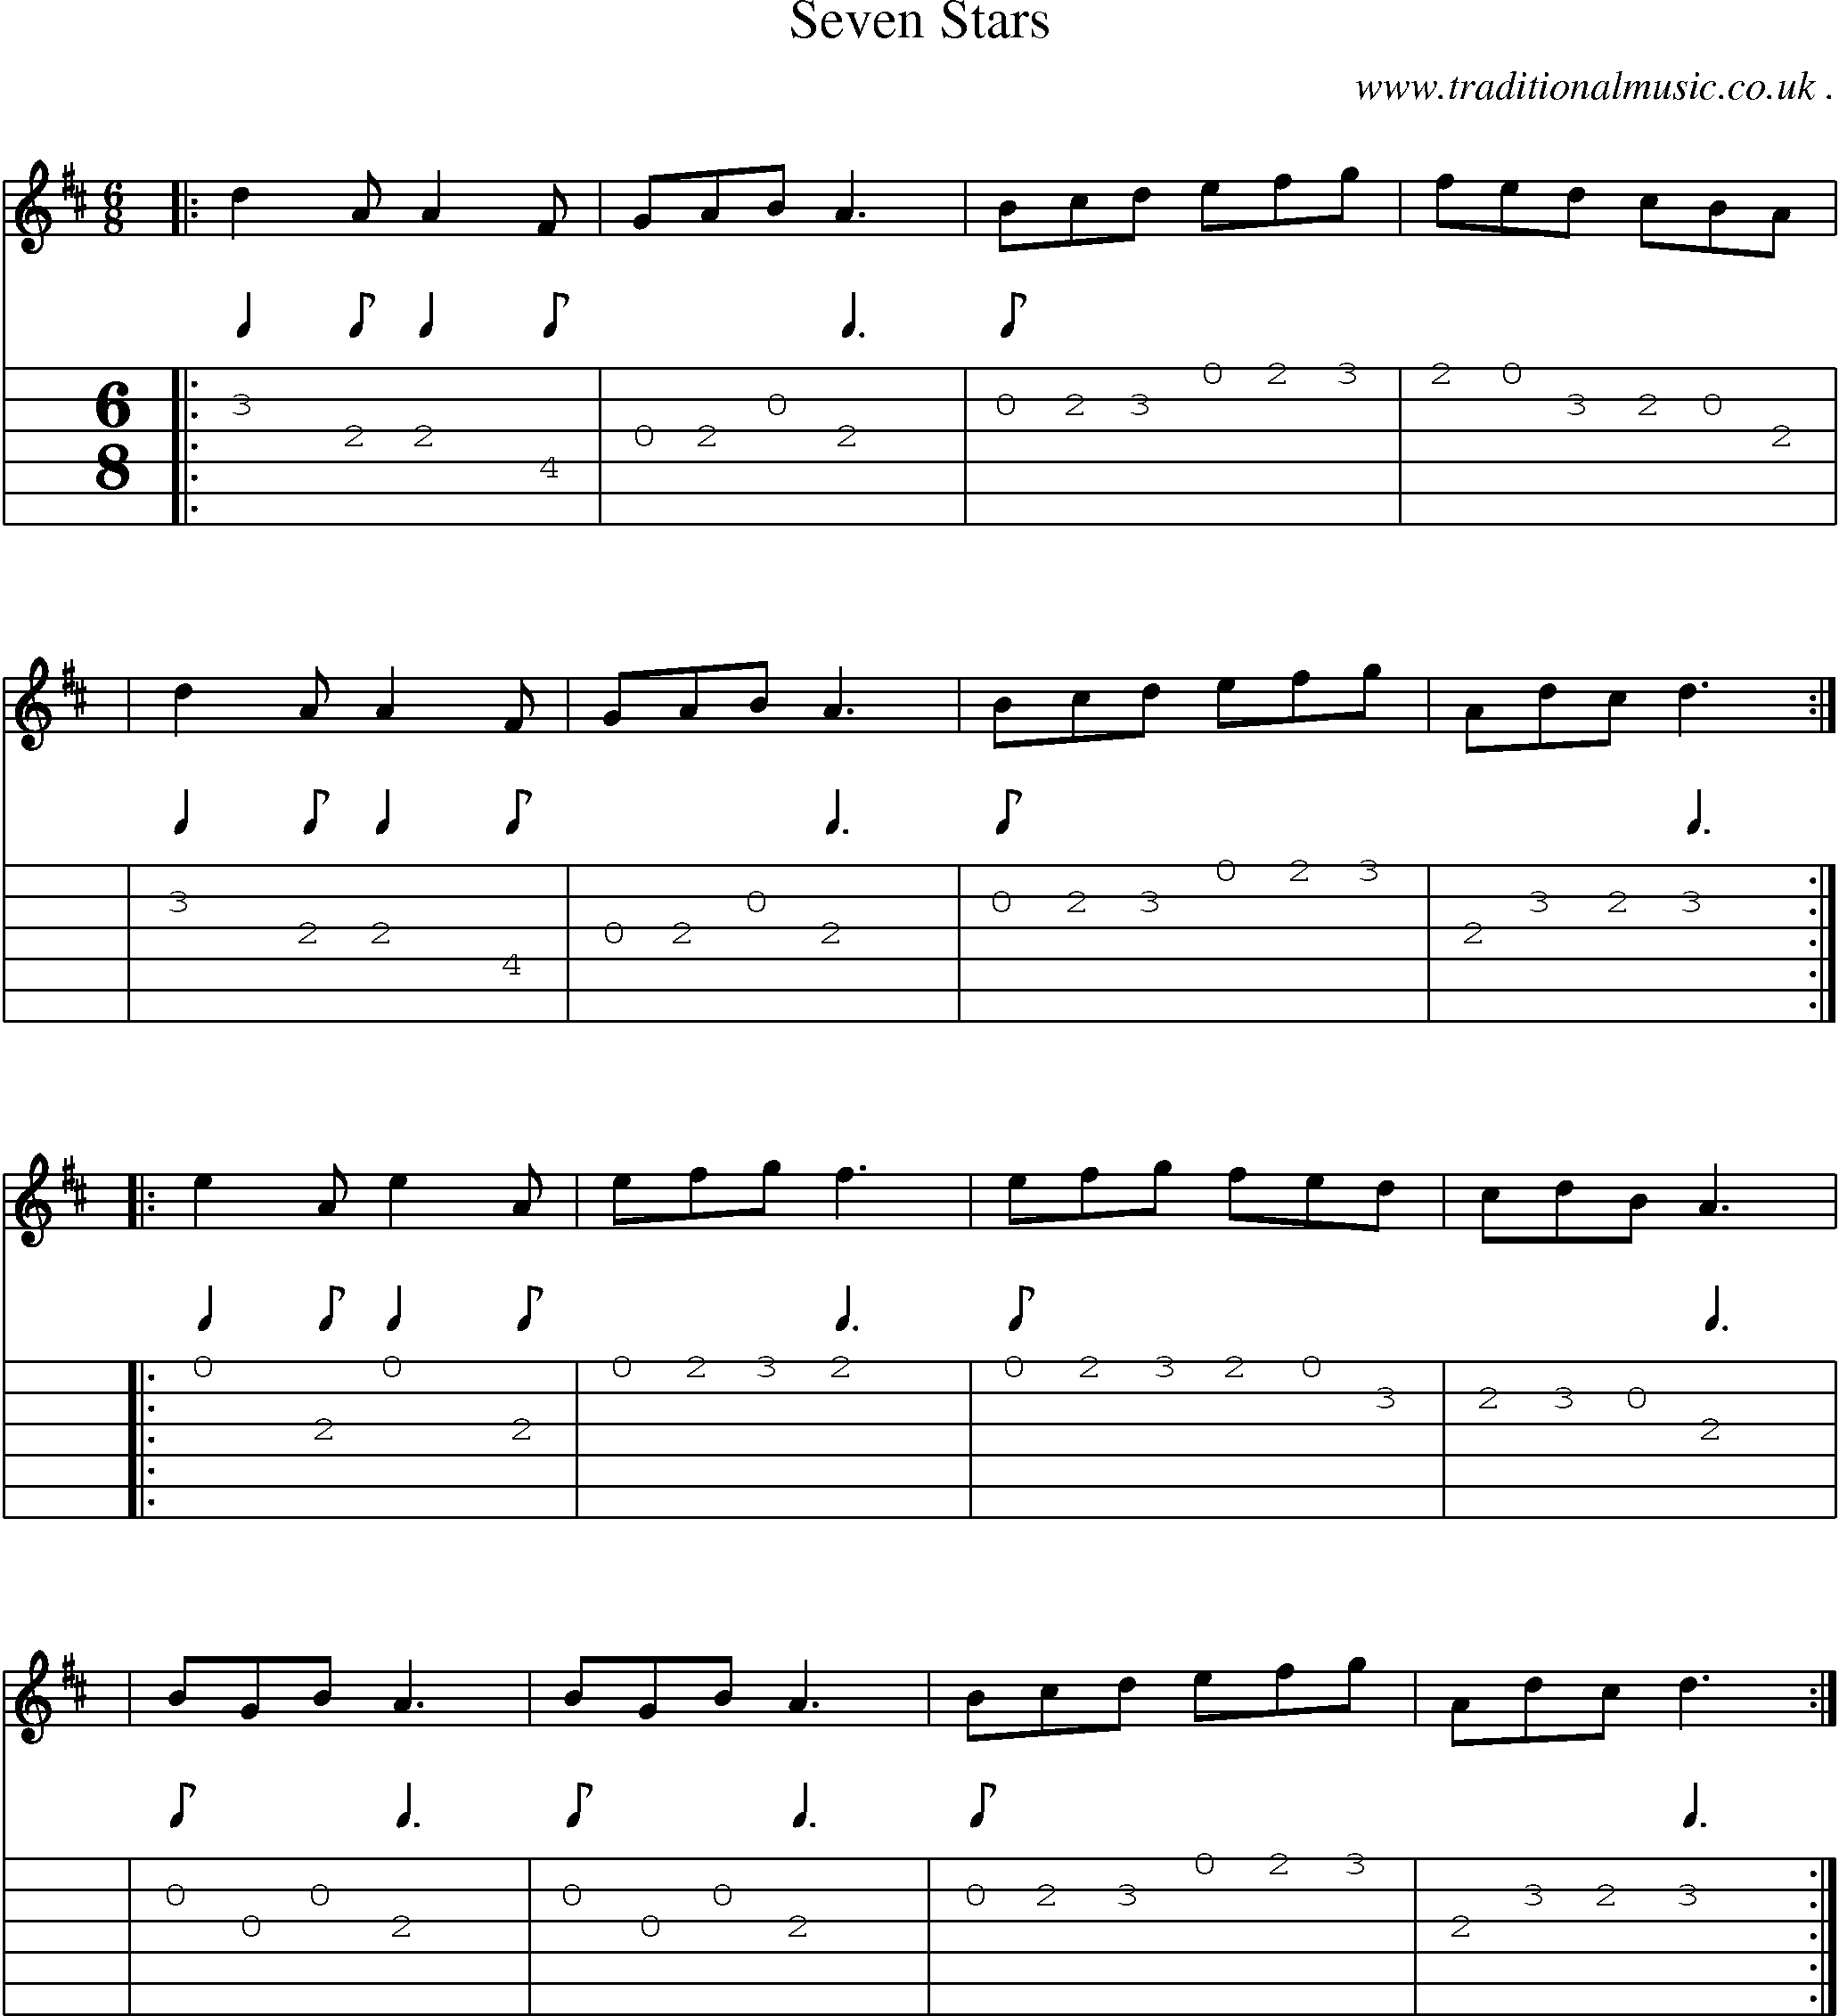 Sheet-Music and Guitar Tabs for Seven Stars